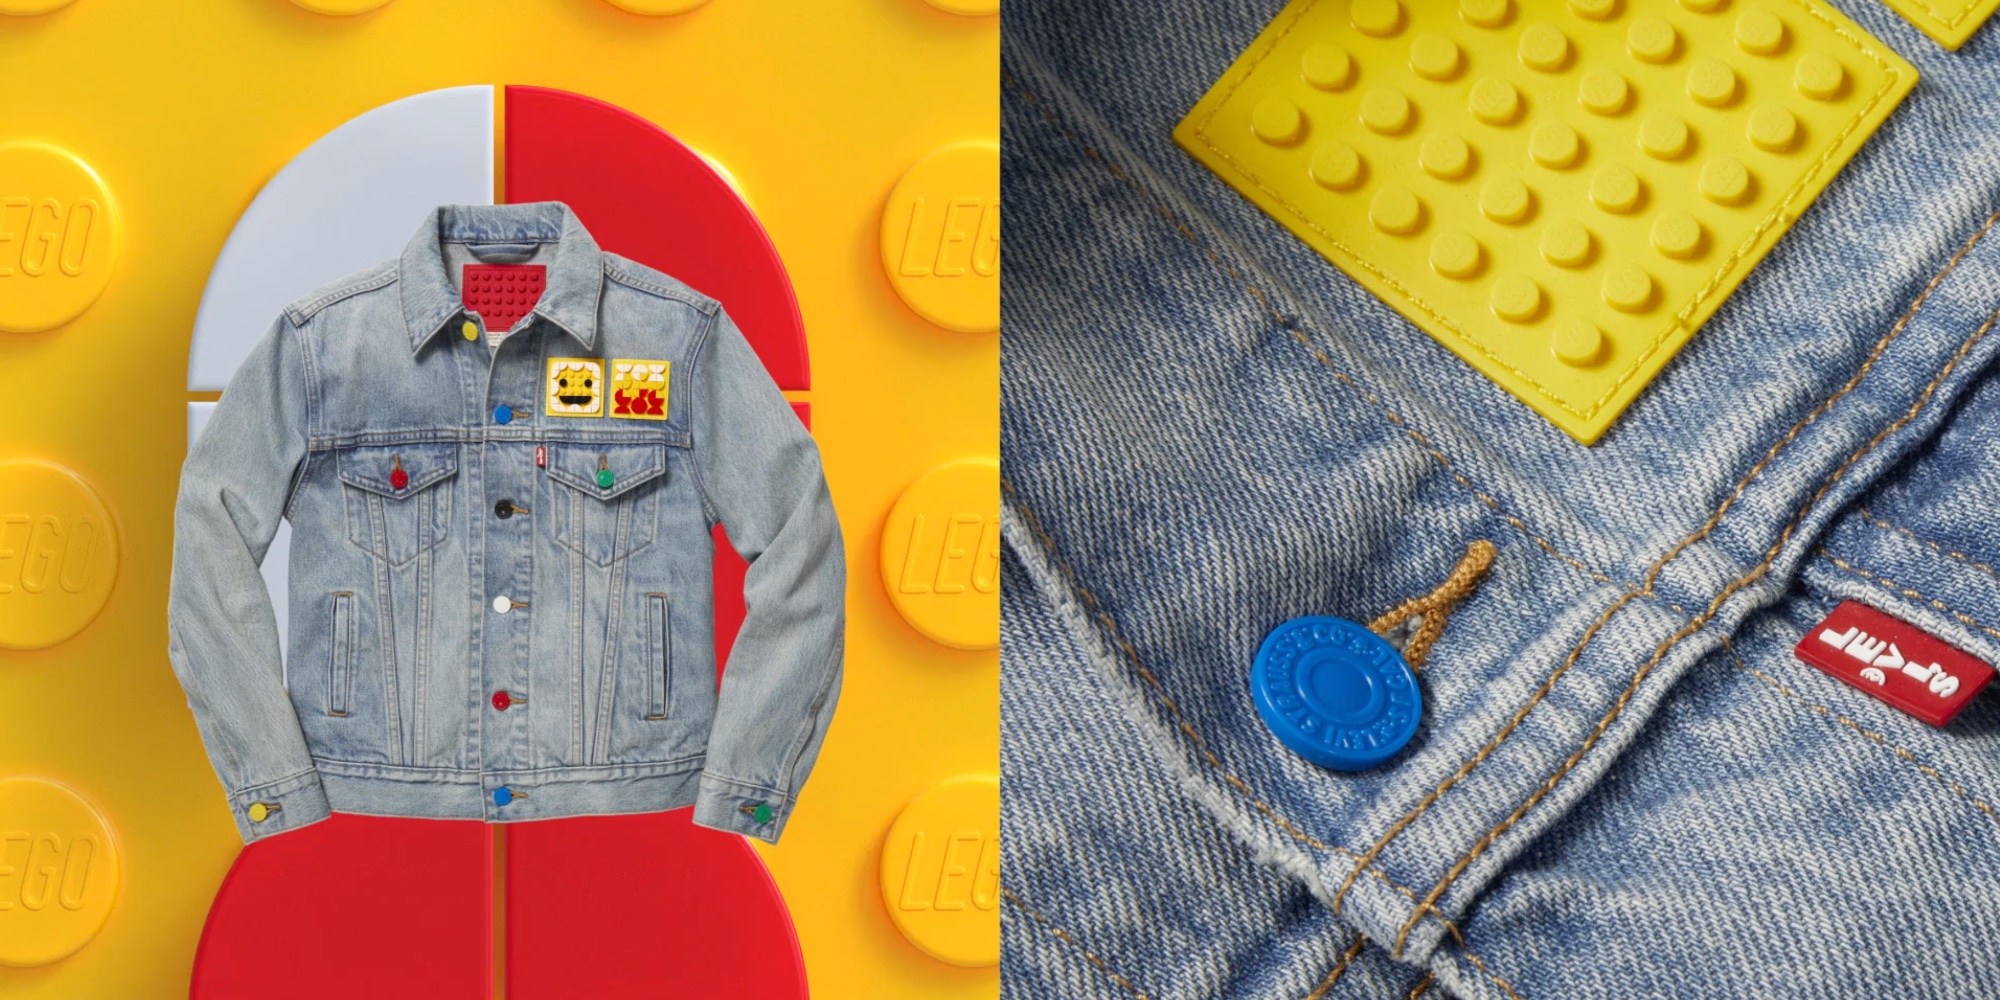 LEGO Levi's are collaborating on a new apparel collection - 9to5Toys